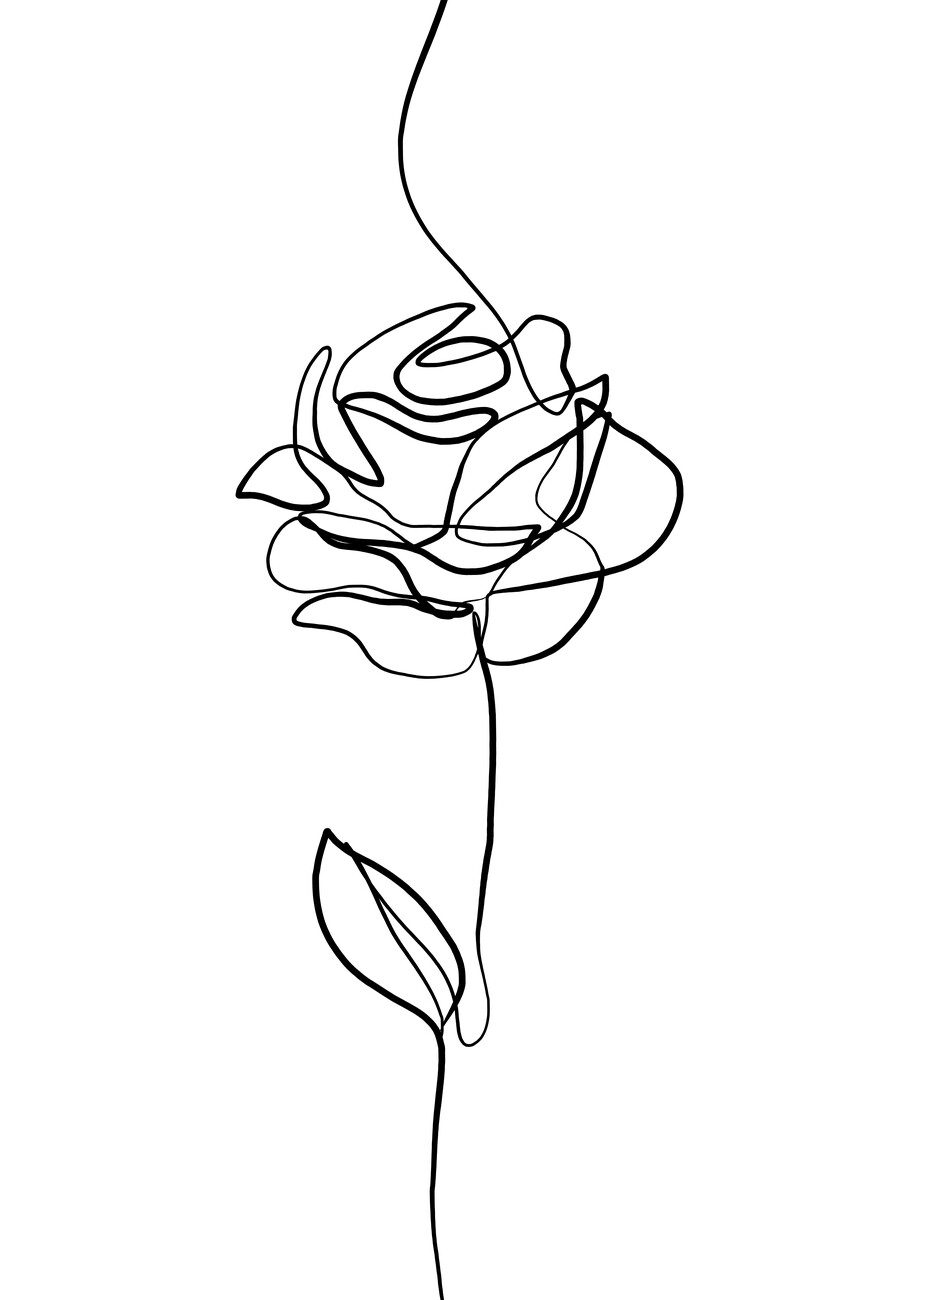 Canvas print Rose Line Drawing | Fine Prints & Wall Decorations